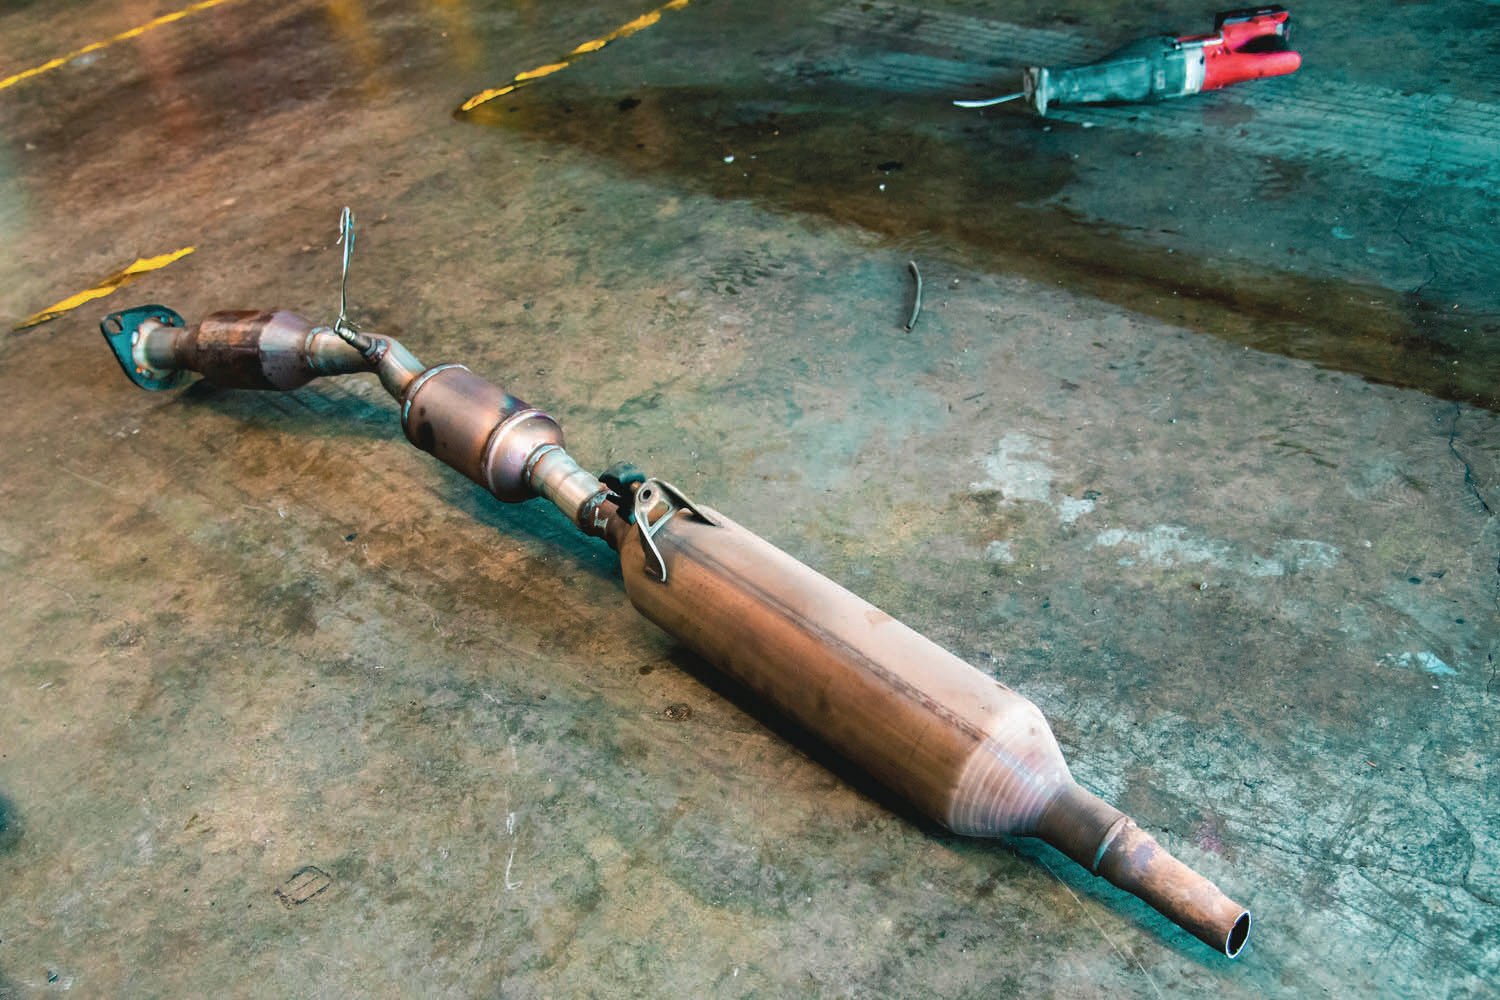 FILE PHOTO — A catalytic converter from a hybrid Prius lays on the floor next to an electric reciprocating hand saw.